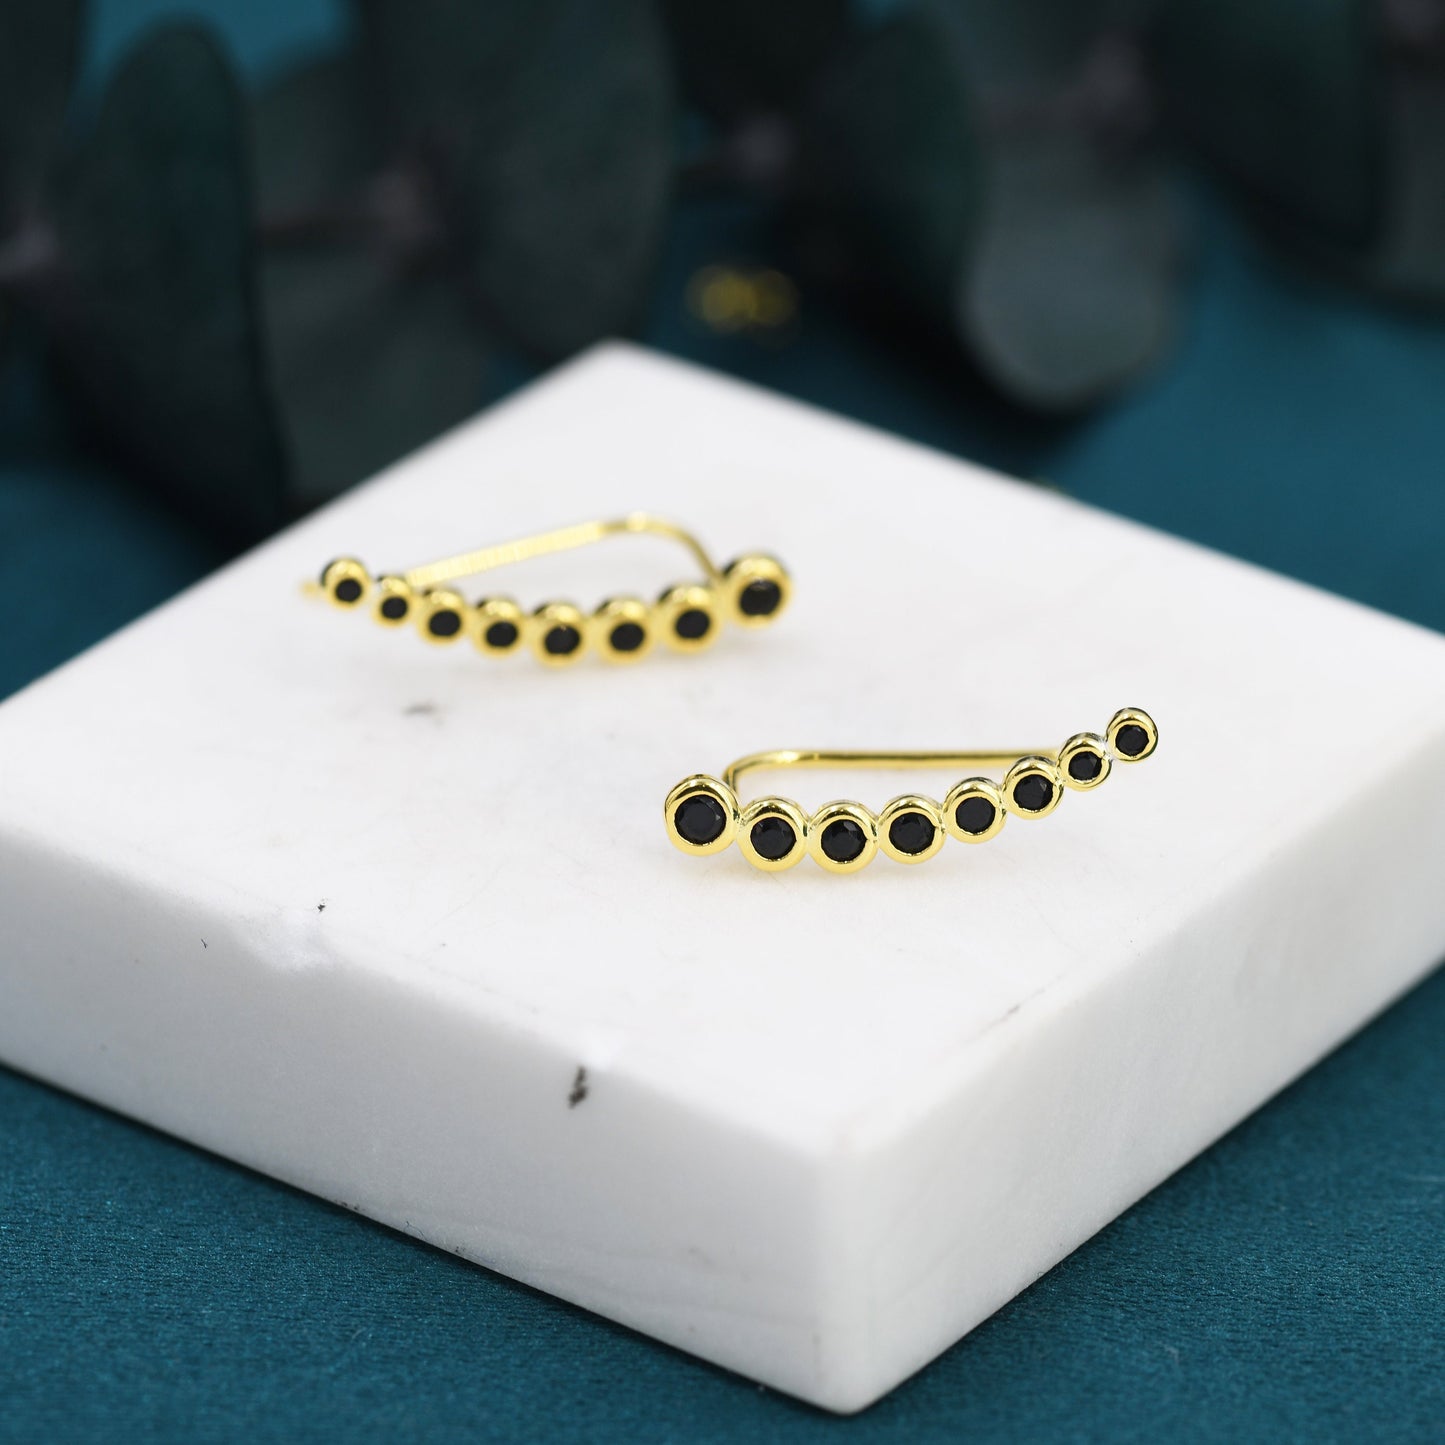 Pebble Black CZ Crawler Earrings in Sterling Silver, Silver or Gold, Dotted Ear Crawlers, Dots Crawler, Bobble Crawlers